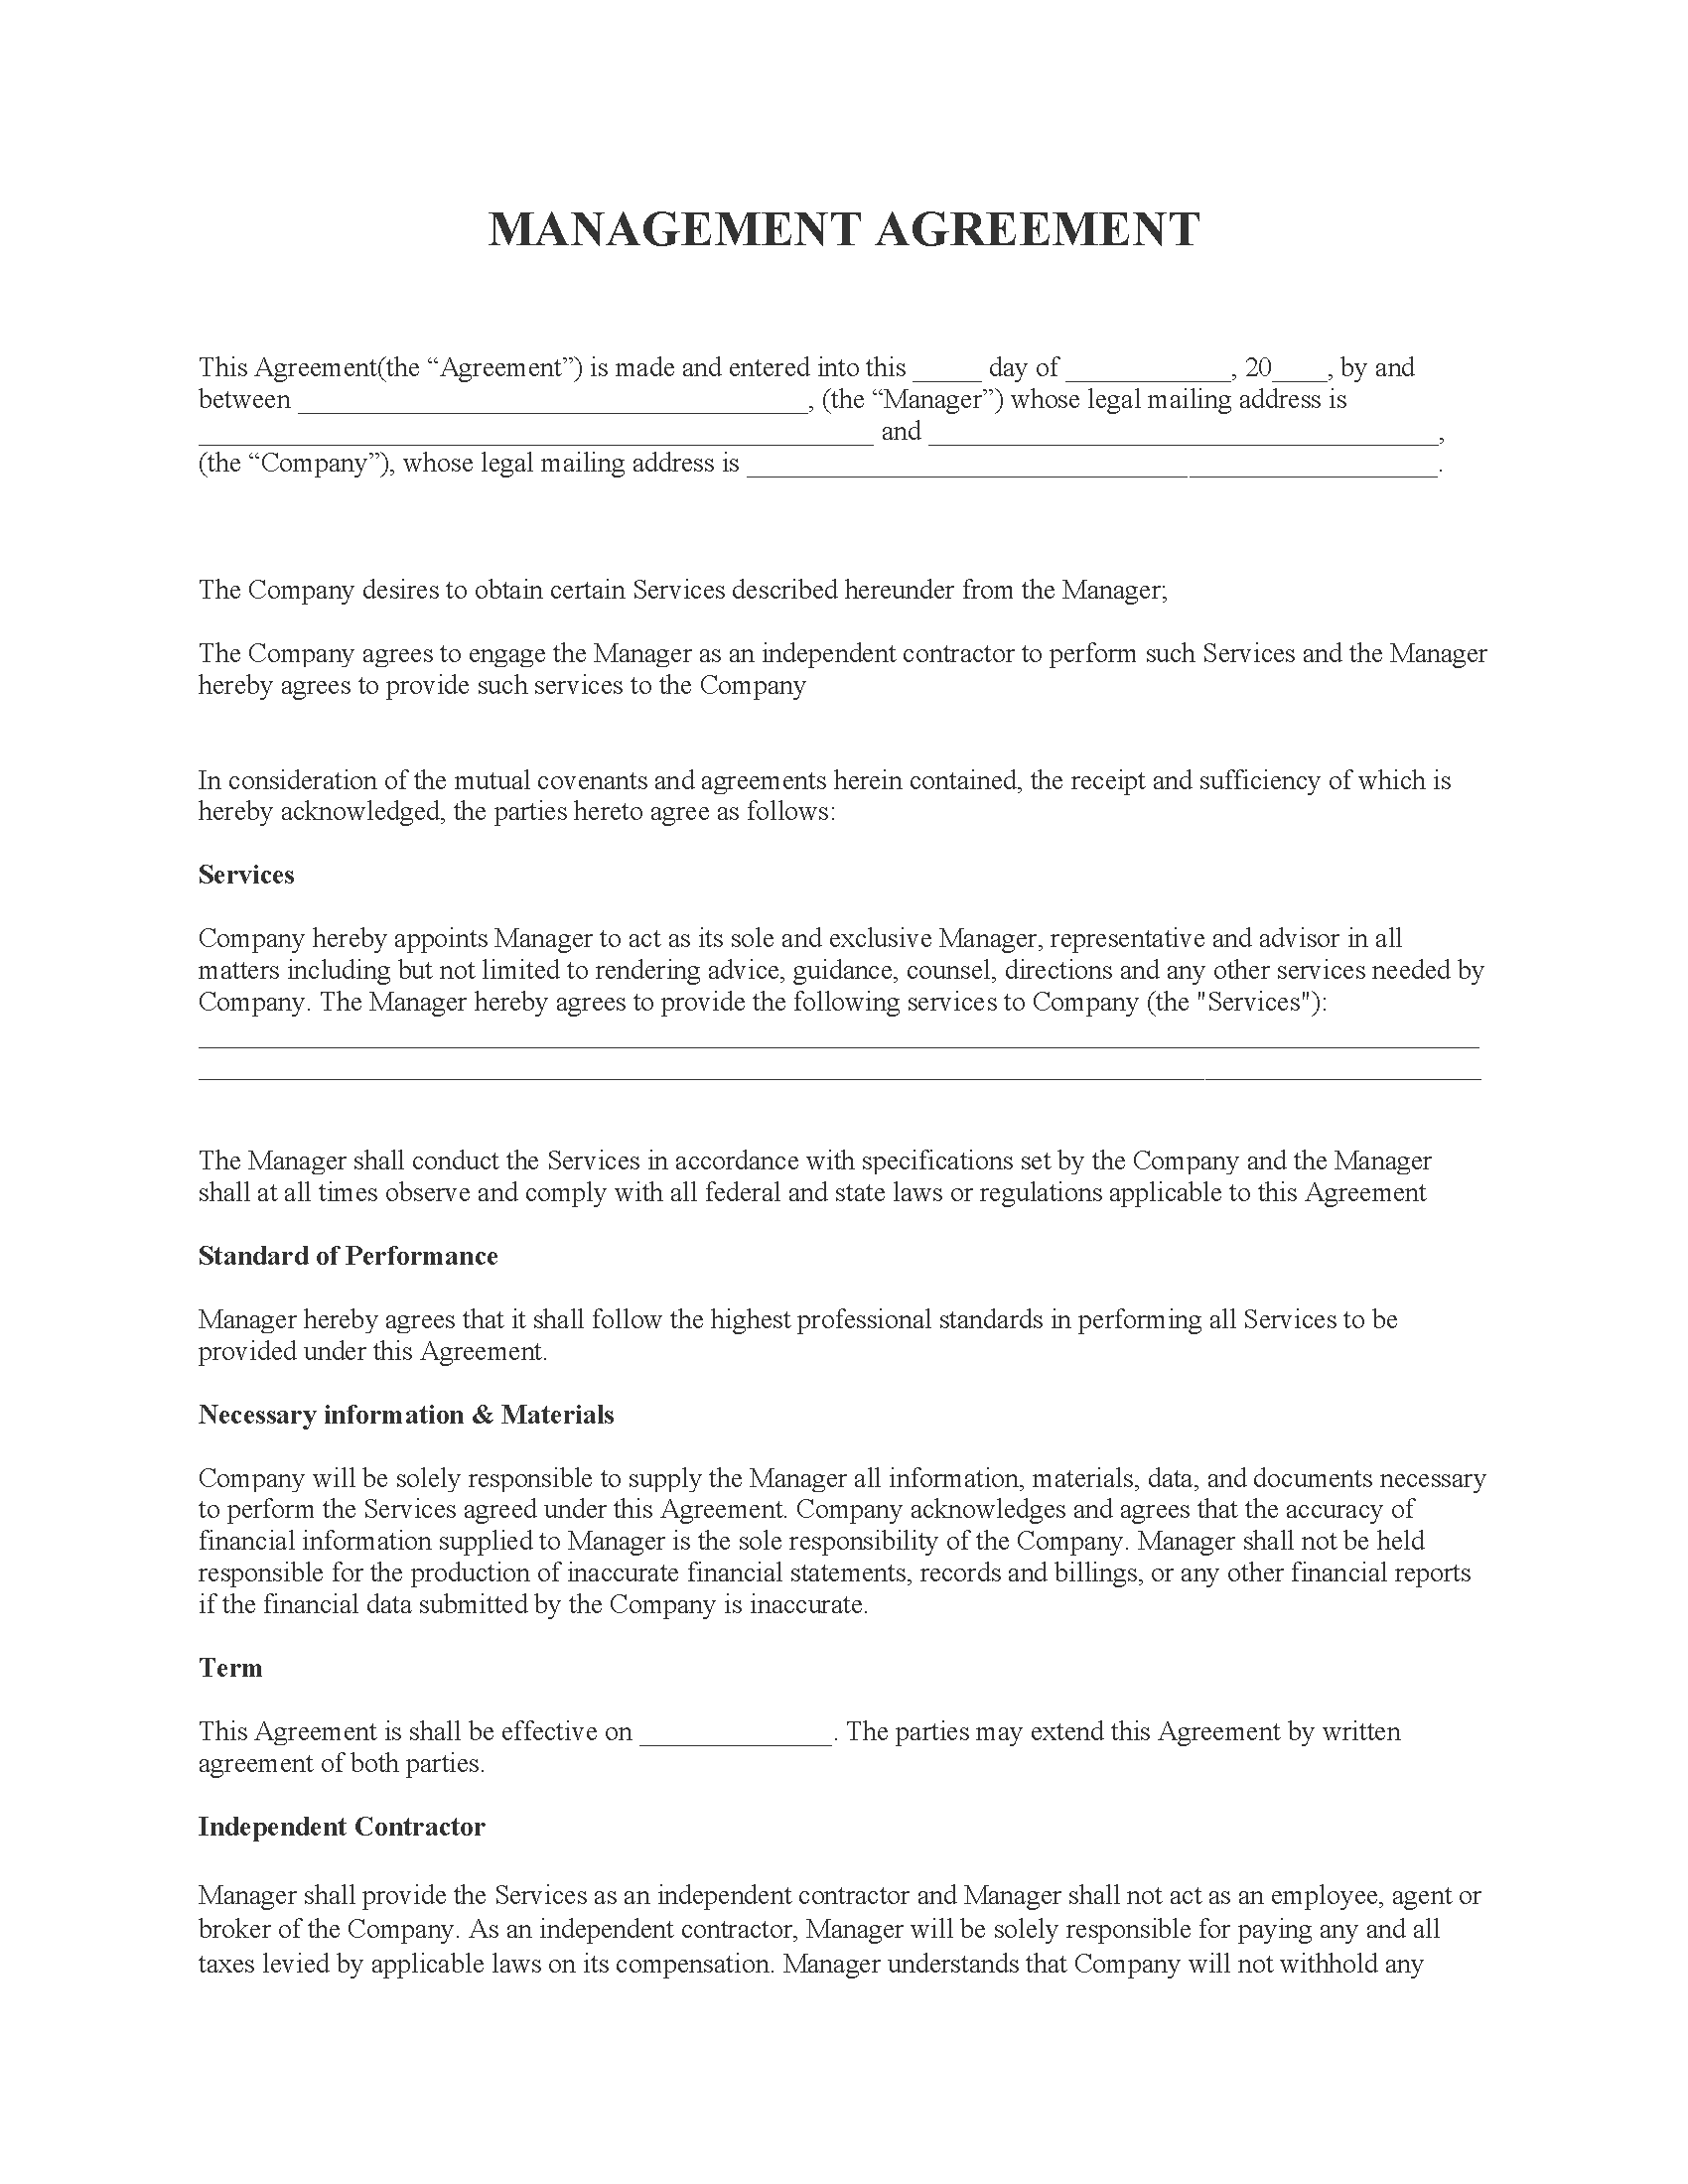 Management Agreement - Word - Free Printable Legal Forms Throughout free contract manufacturing agreements templates